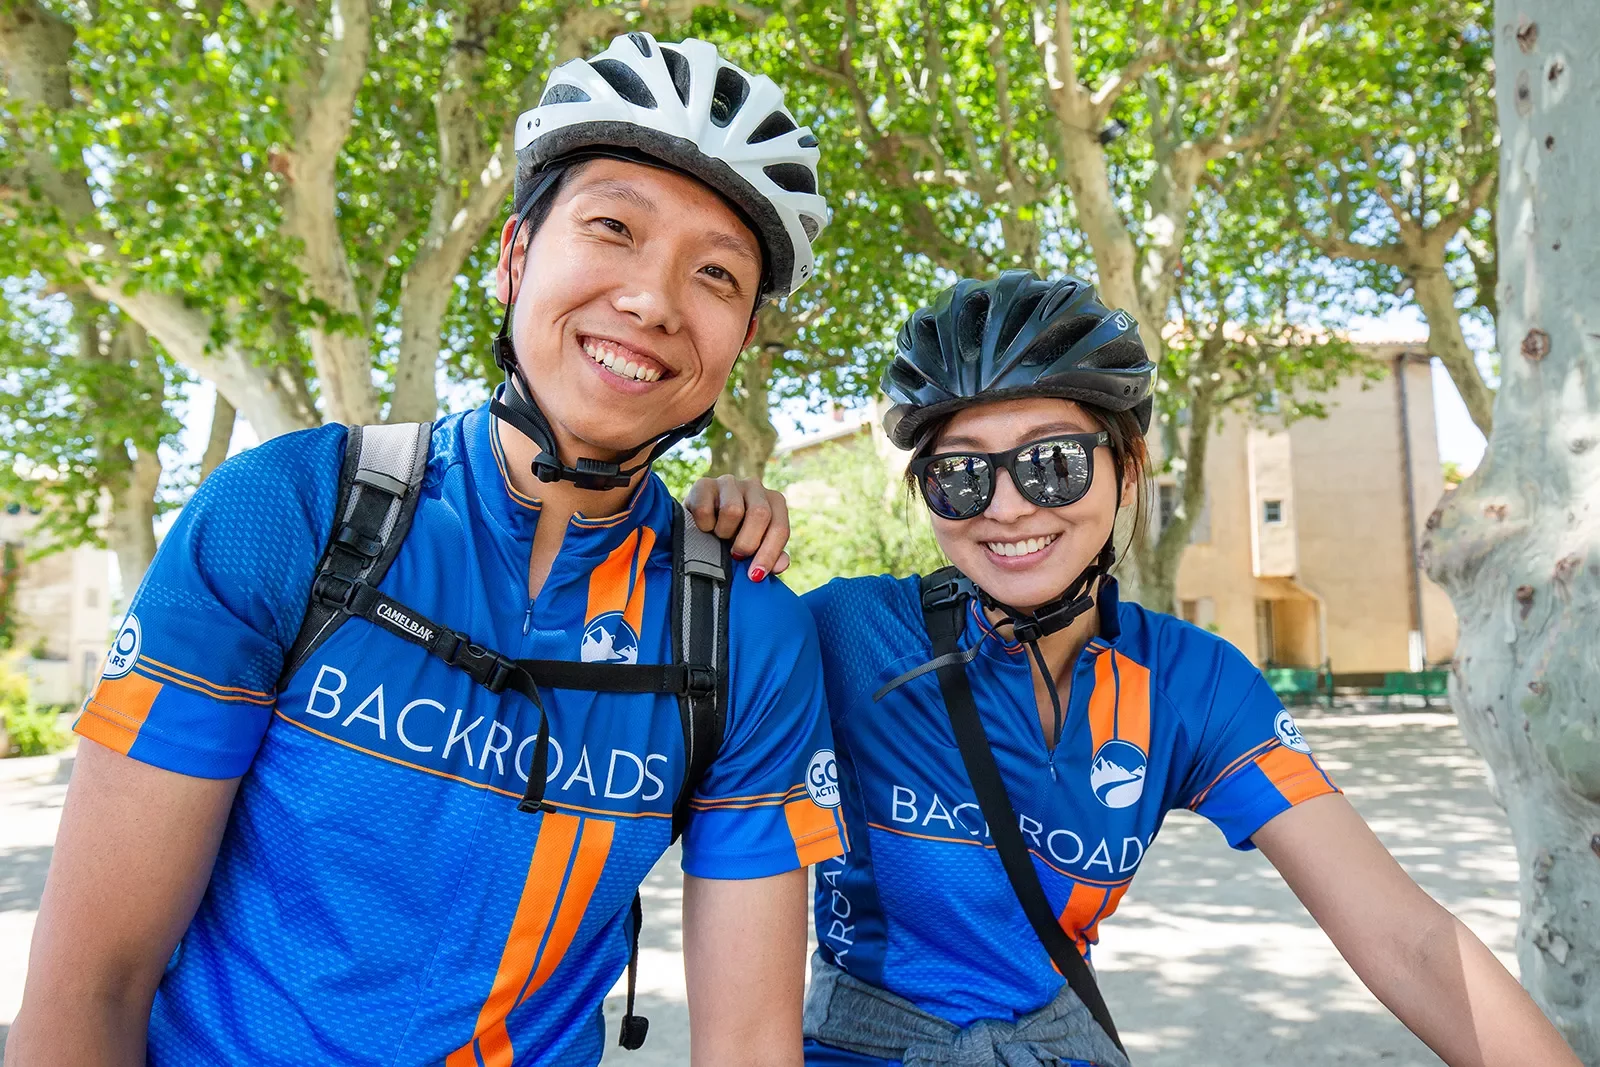 Two Backroads guests wearing bike jerseys and smiling at the camera